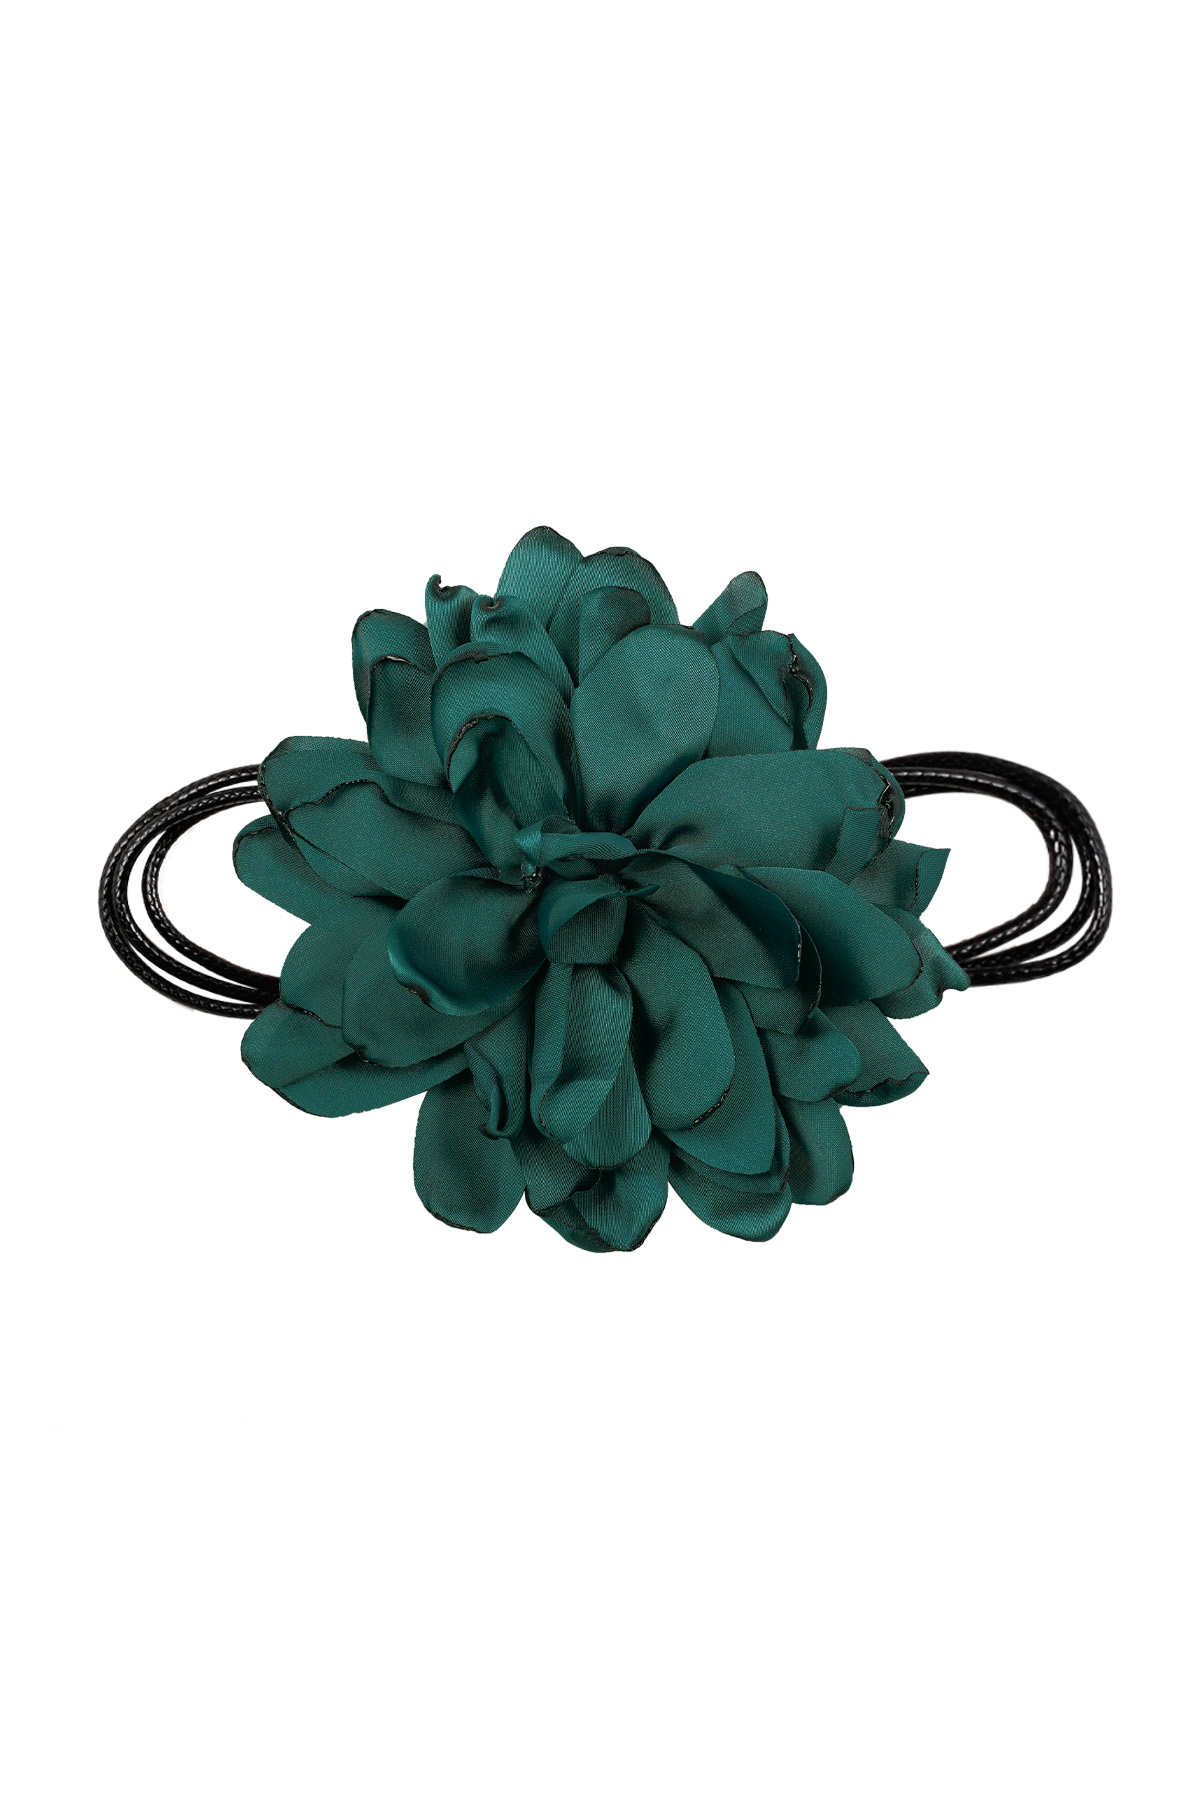 Necklace large flower - green h5 